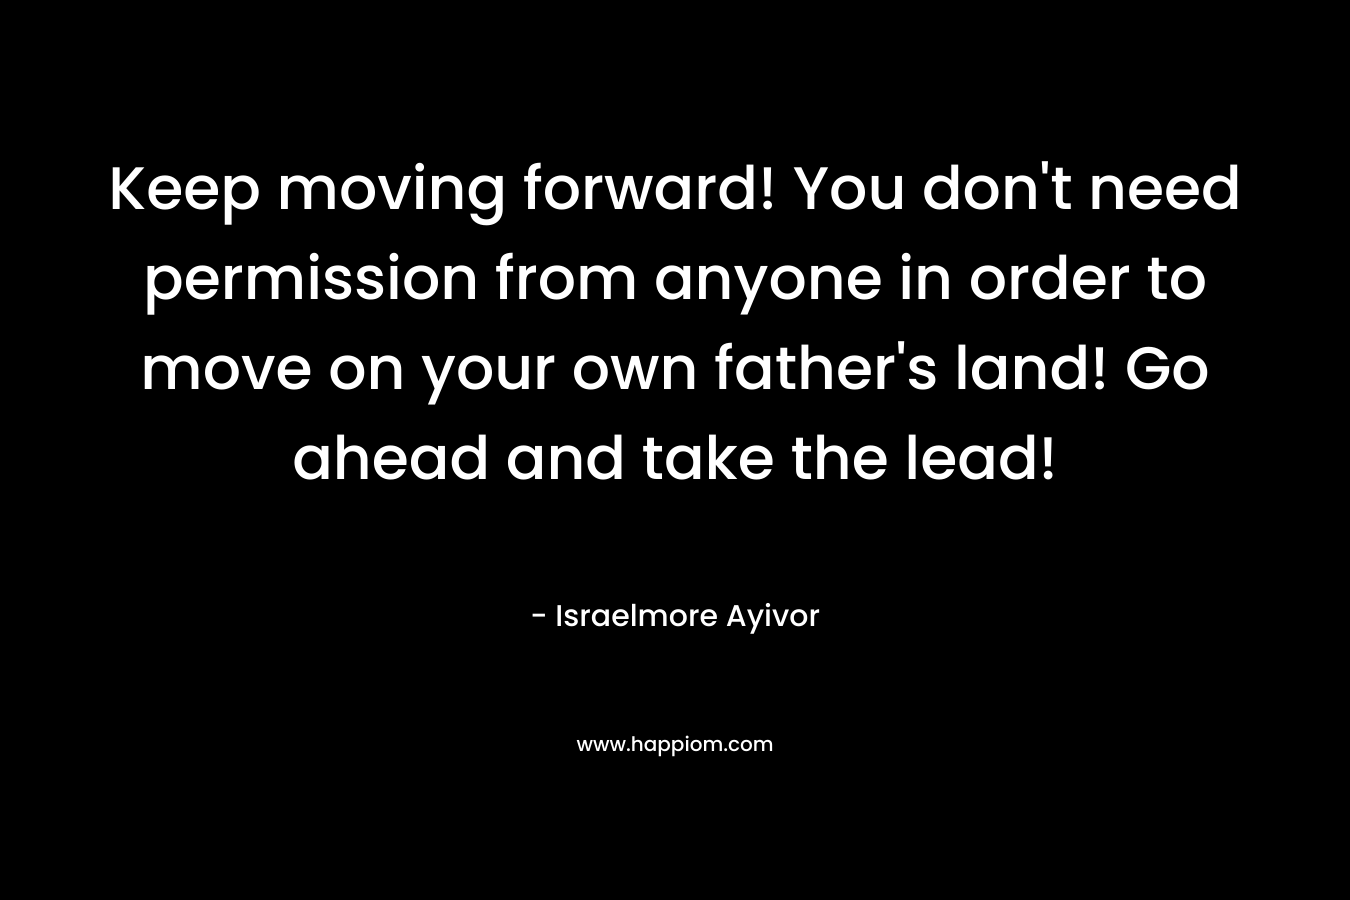 Keep moving forward! You don't need permission from anyone in order to move on your own father's land! Go ahead and take the lead!